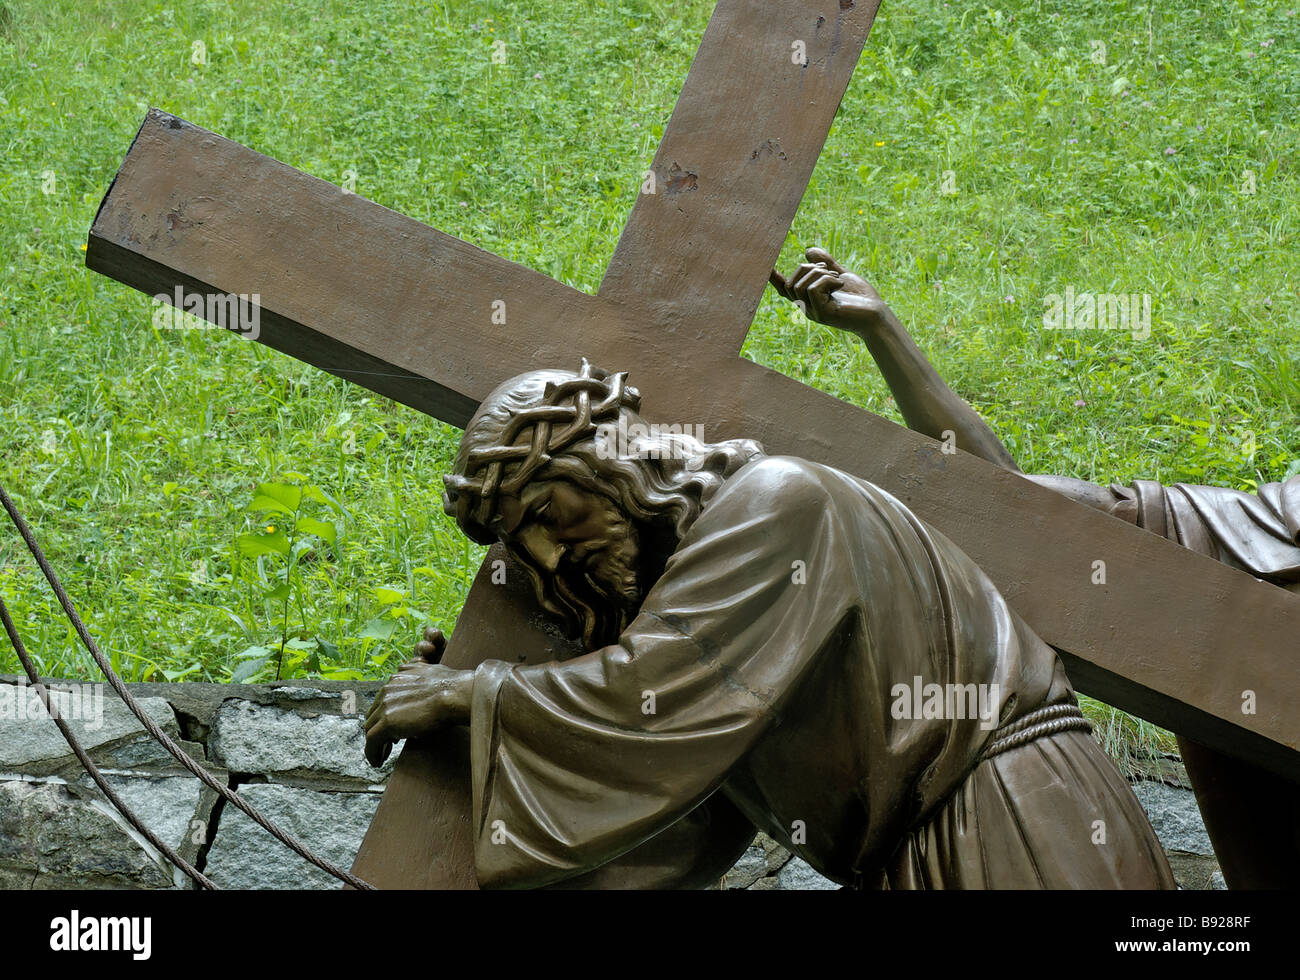 Jesus carrying the cross from the stations of the cross Stock Photo